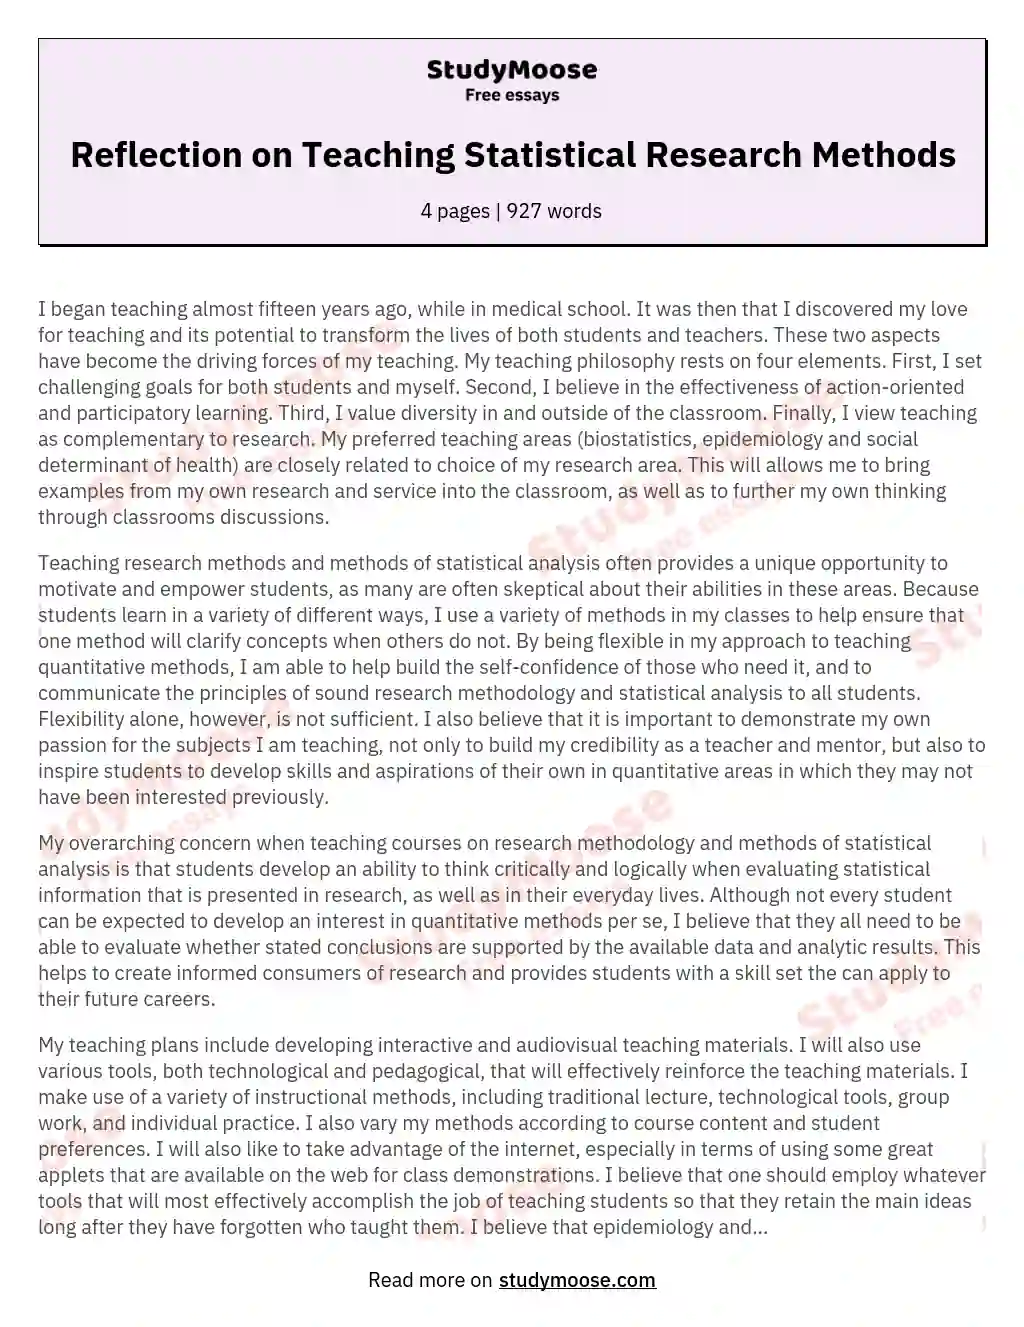 Reflection on Teaching Statistical Research Methods essay